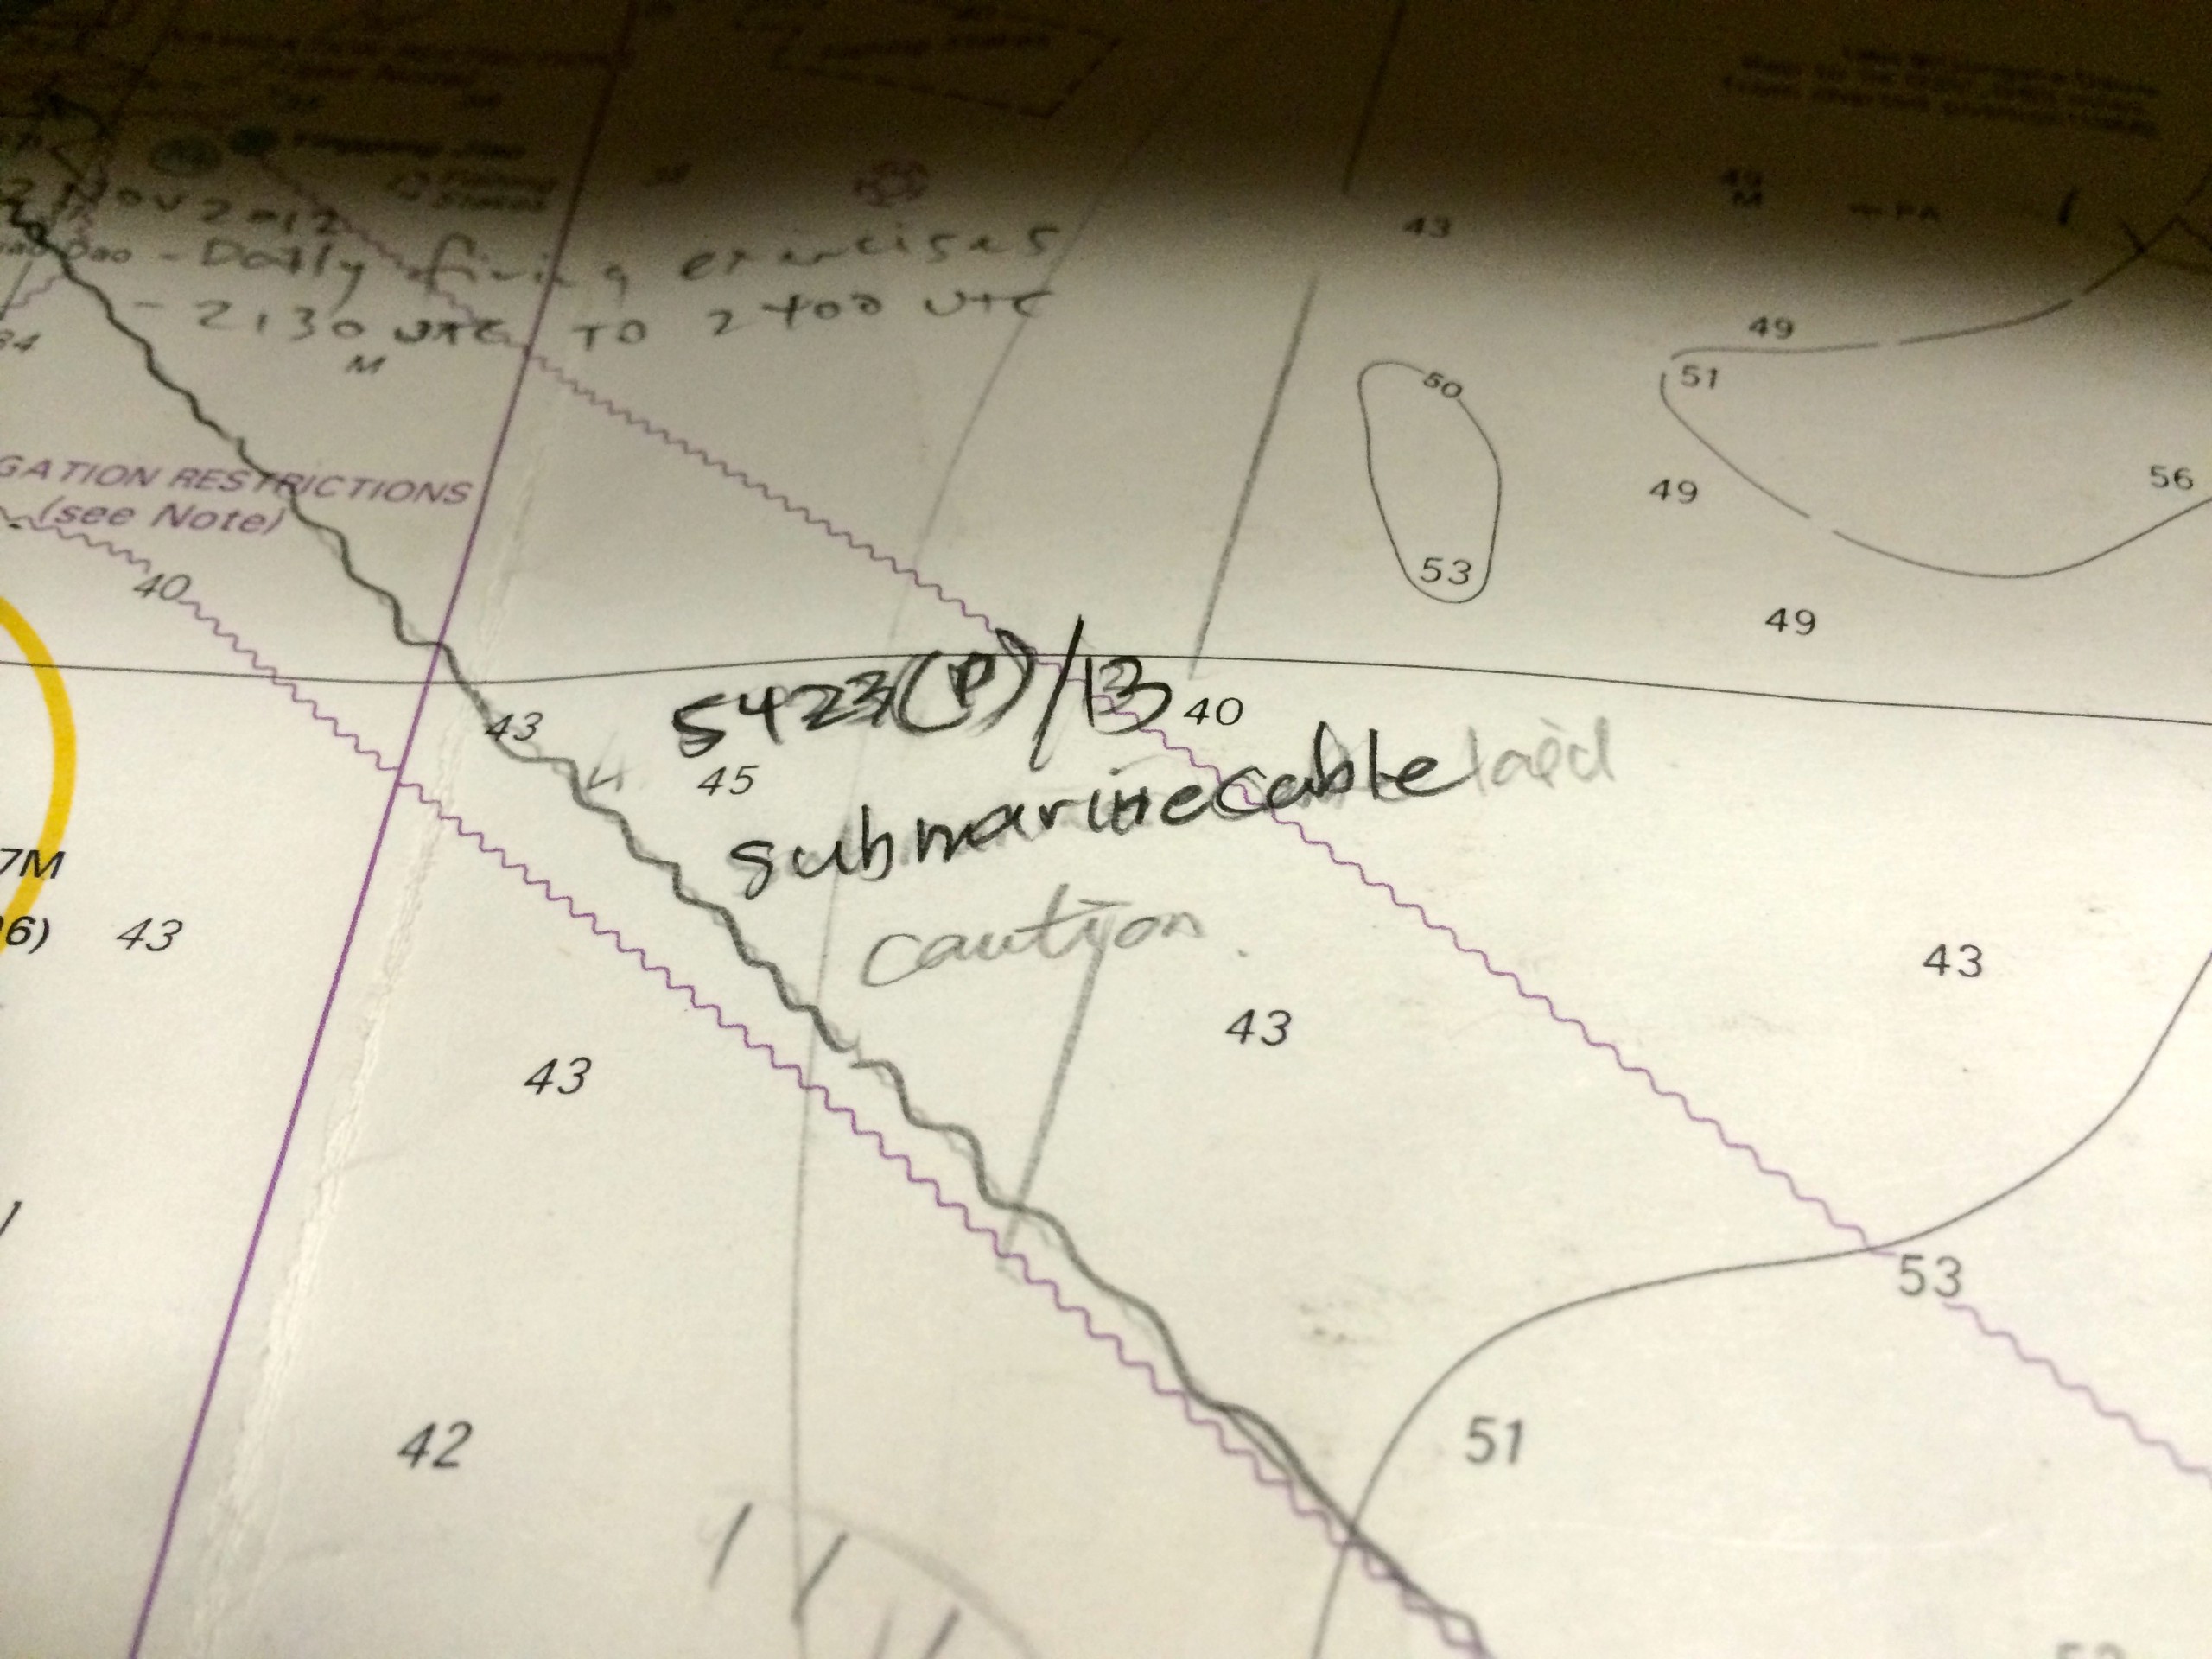 A nautical navigation map with scribbled notes on it, indicating the location of an undersea cable.